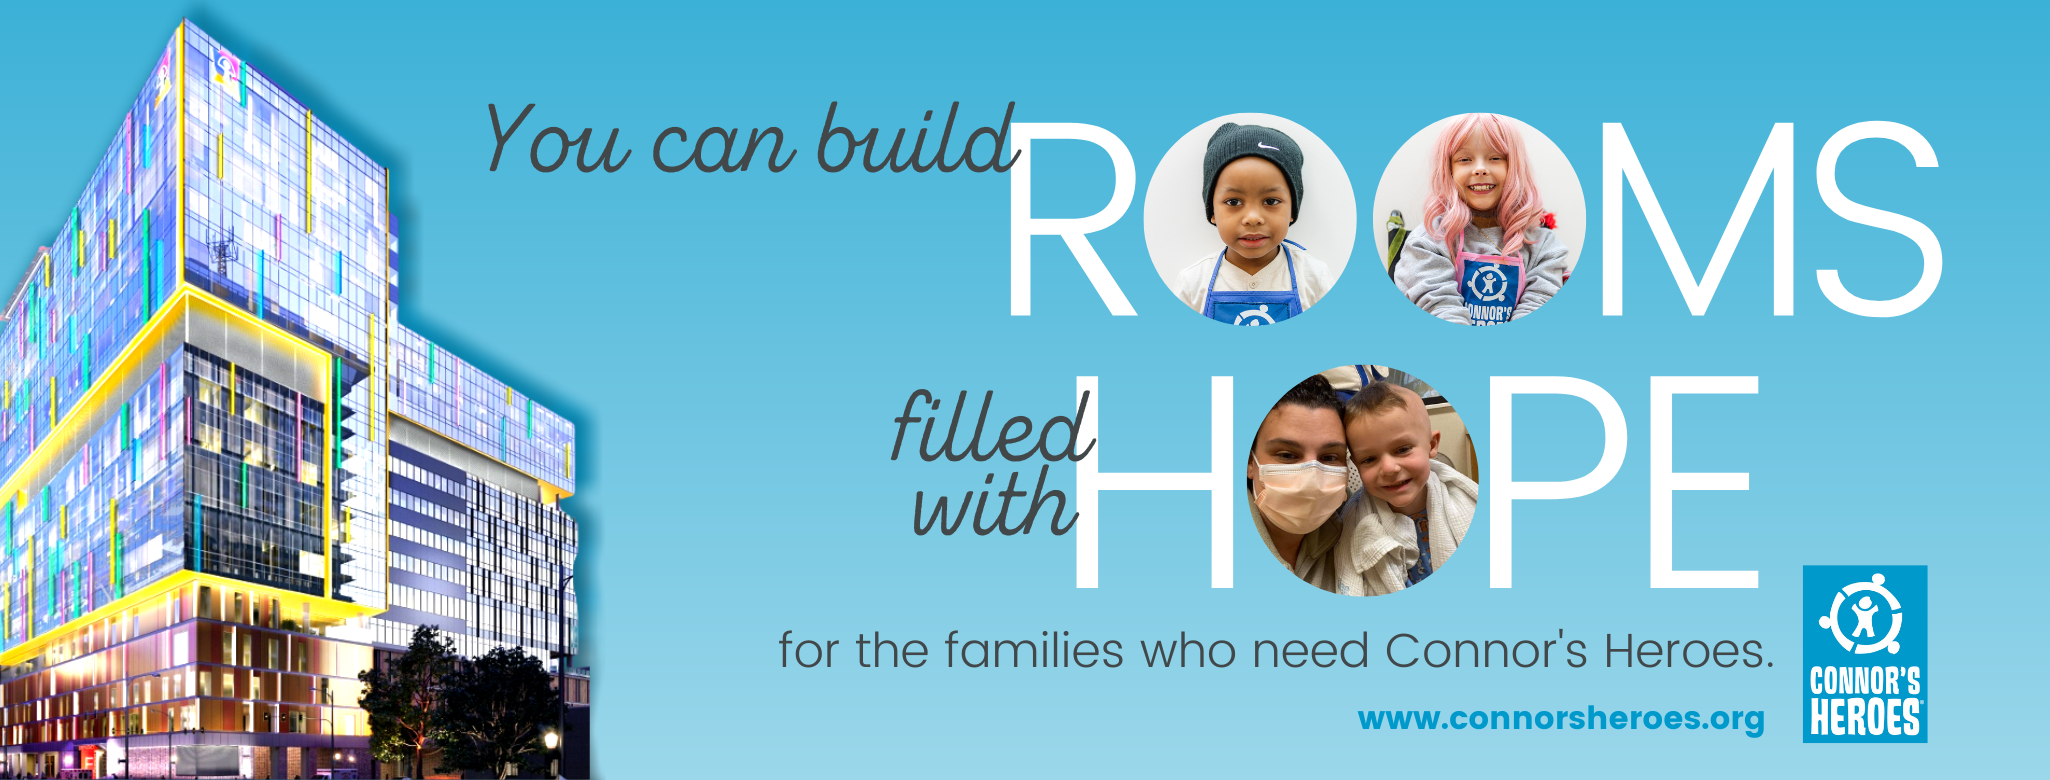 Image building in blue background Text You can build Rooms filled with Hope for the families who need Connor's Heroes